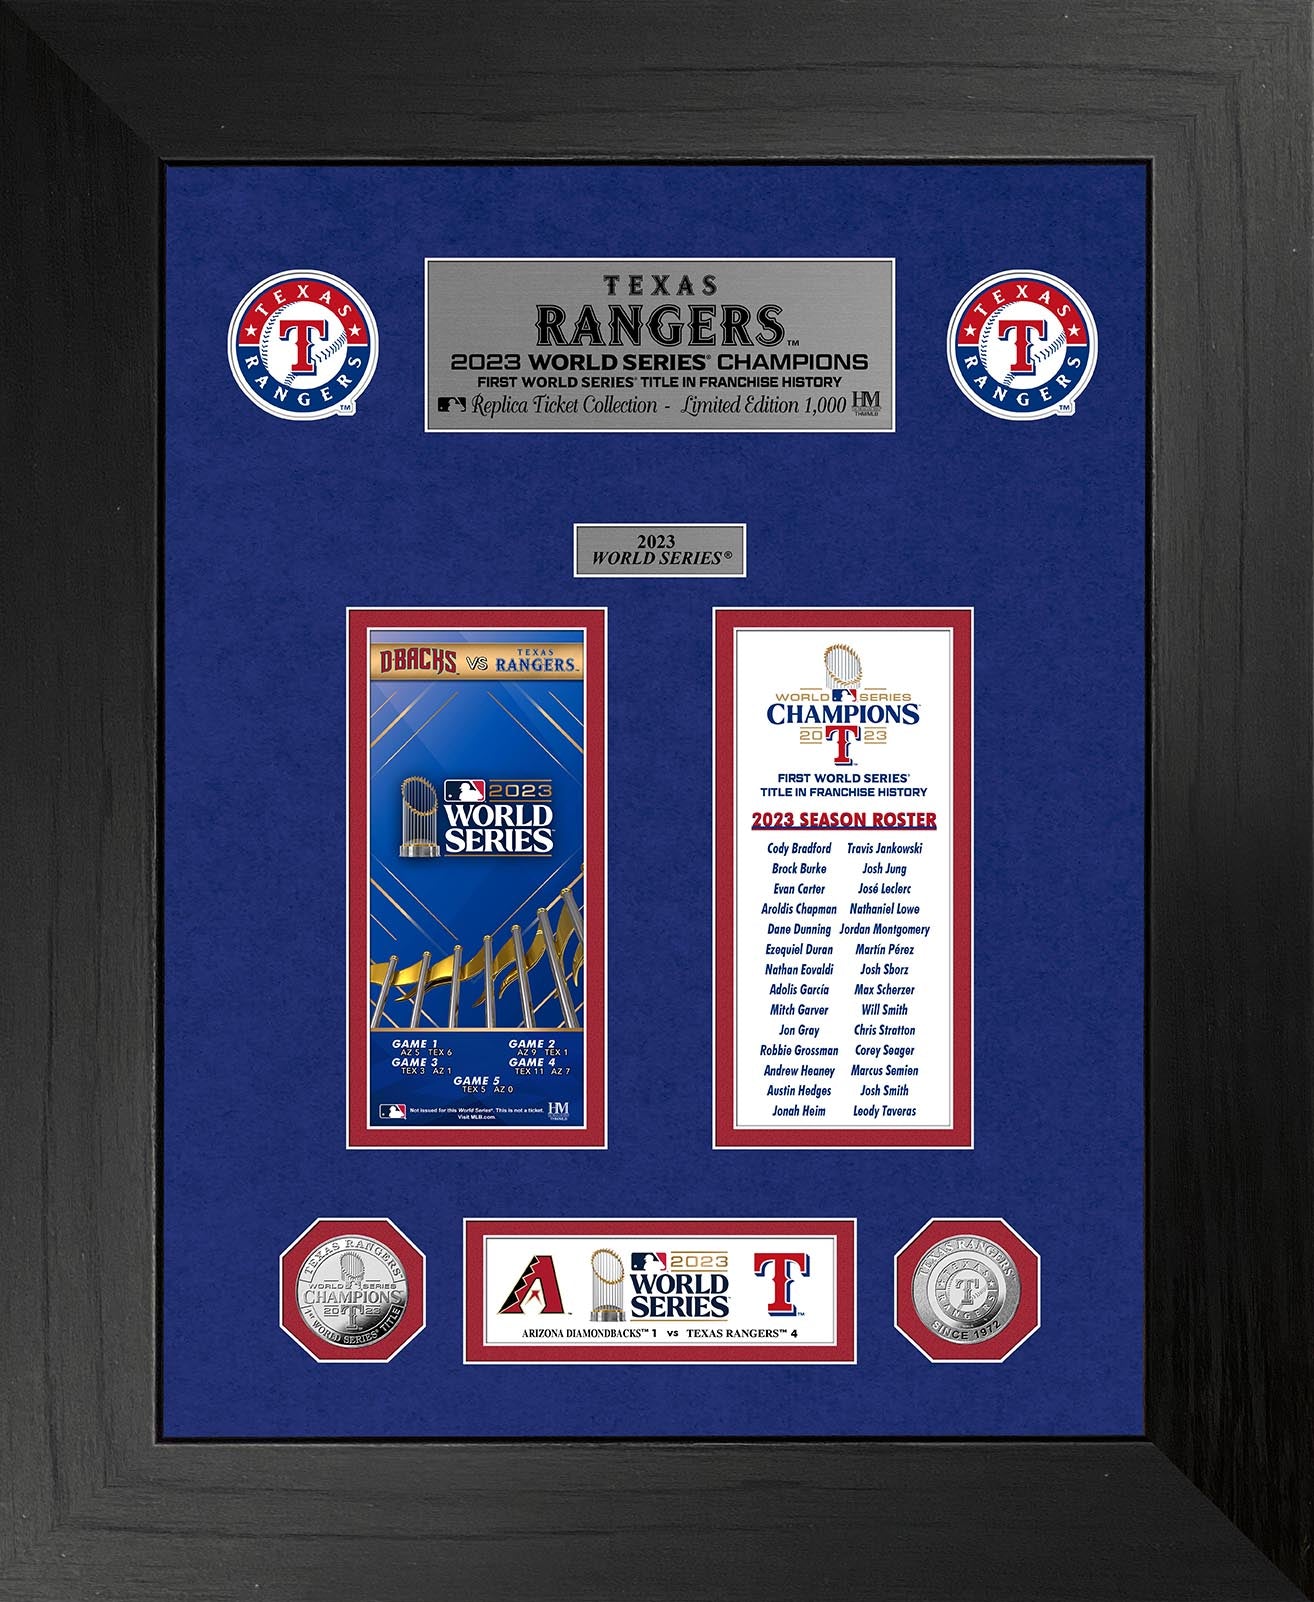 Texas Rangers 2023 World Series Champs DELUXE Ticket Collection Photo Mint